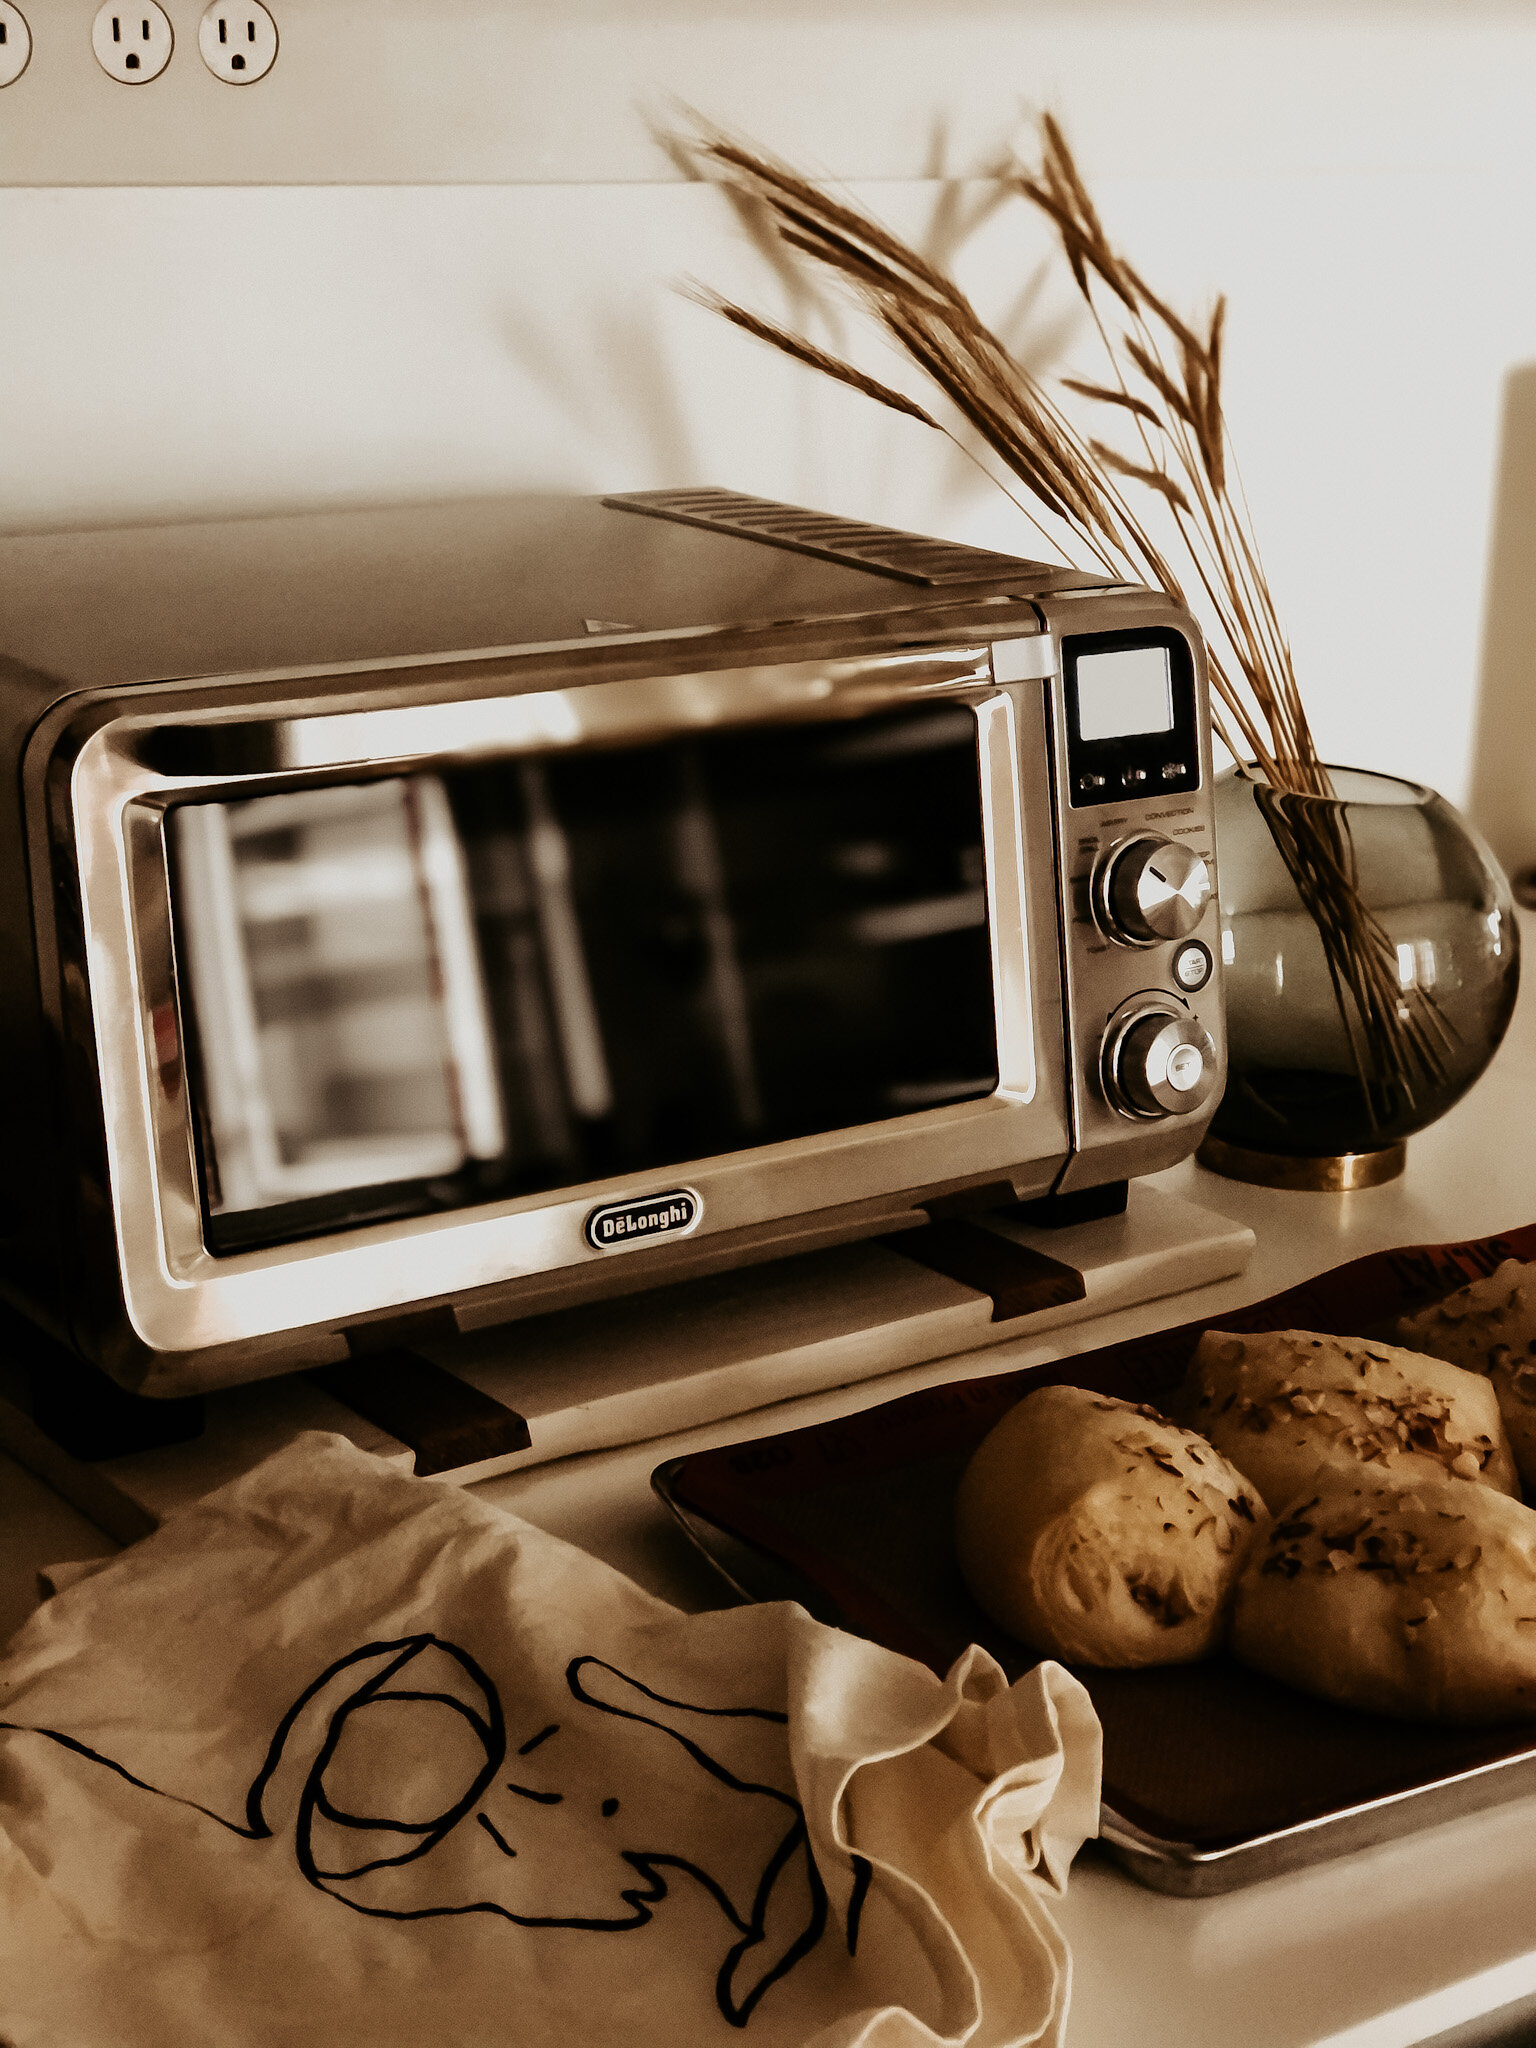 De'Longhi Livenza Air Fry Convection Oven Review — Go French Yourself